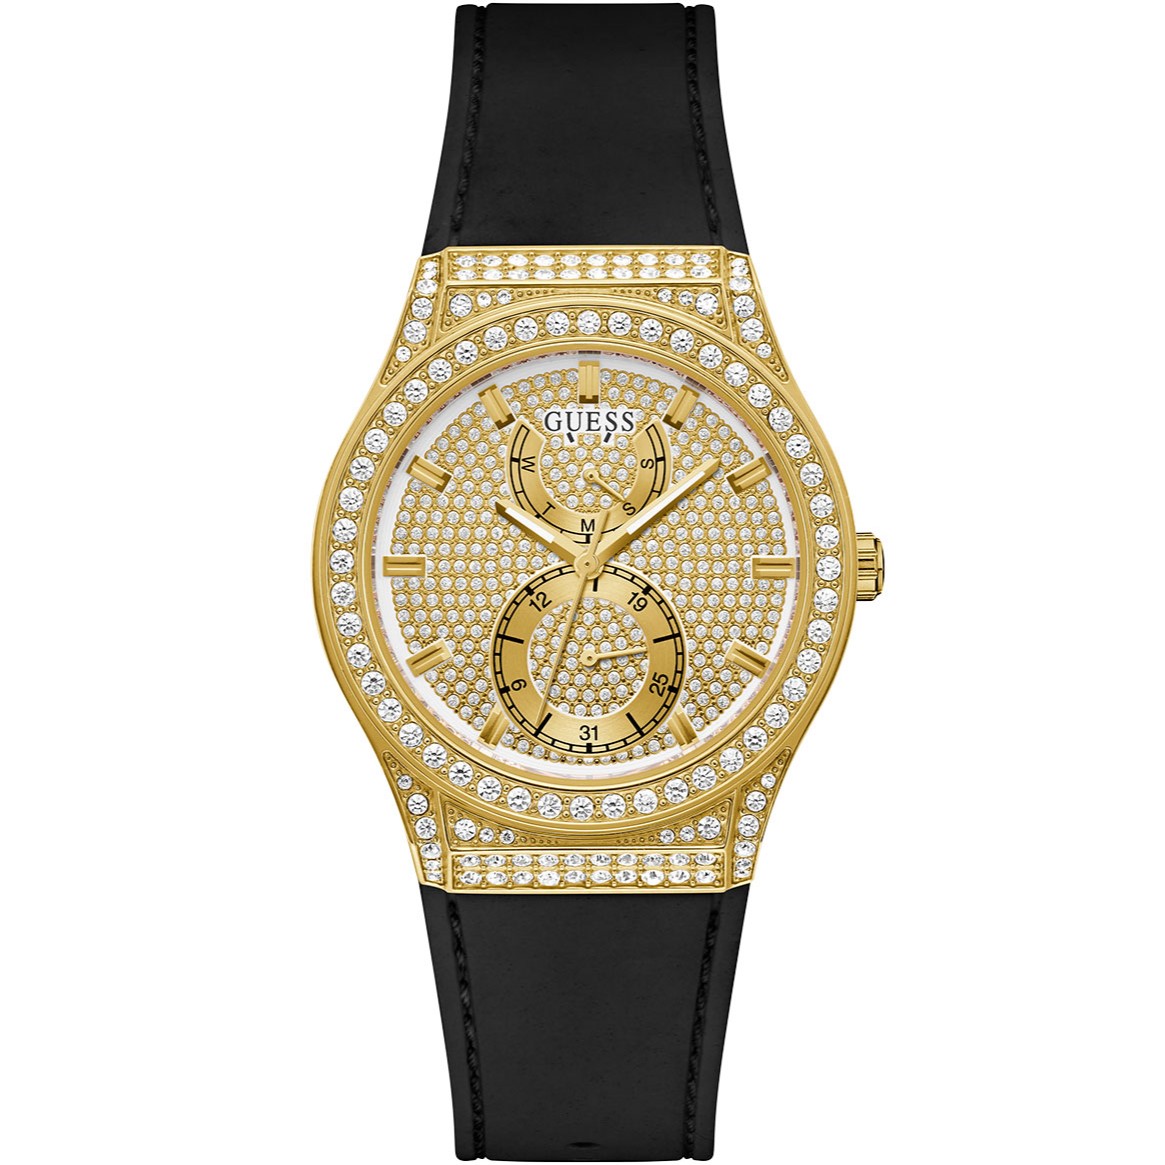 ĐỒNG HỒ NỮ GUESS MULTIFUNCTION CRYSTALLIZED PRINCESS BLACK GOLD TONE LADIES WATCH GW0439L2 3